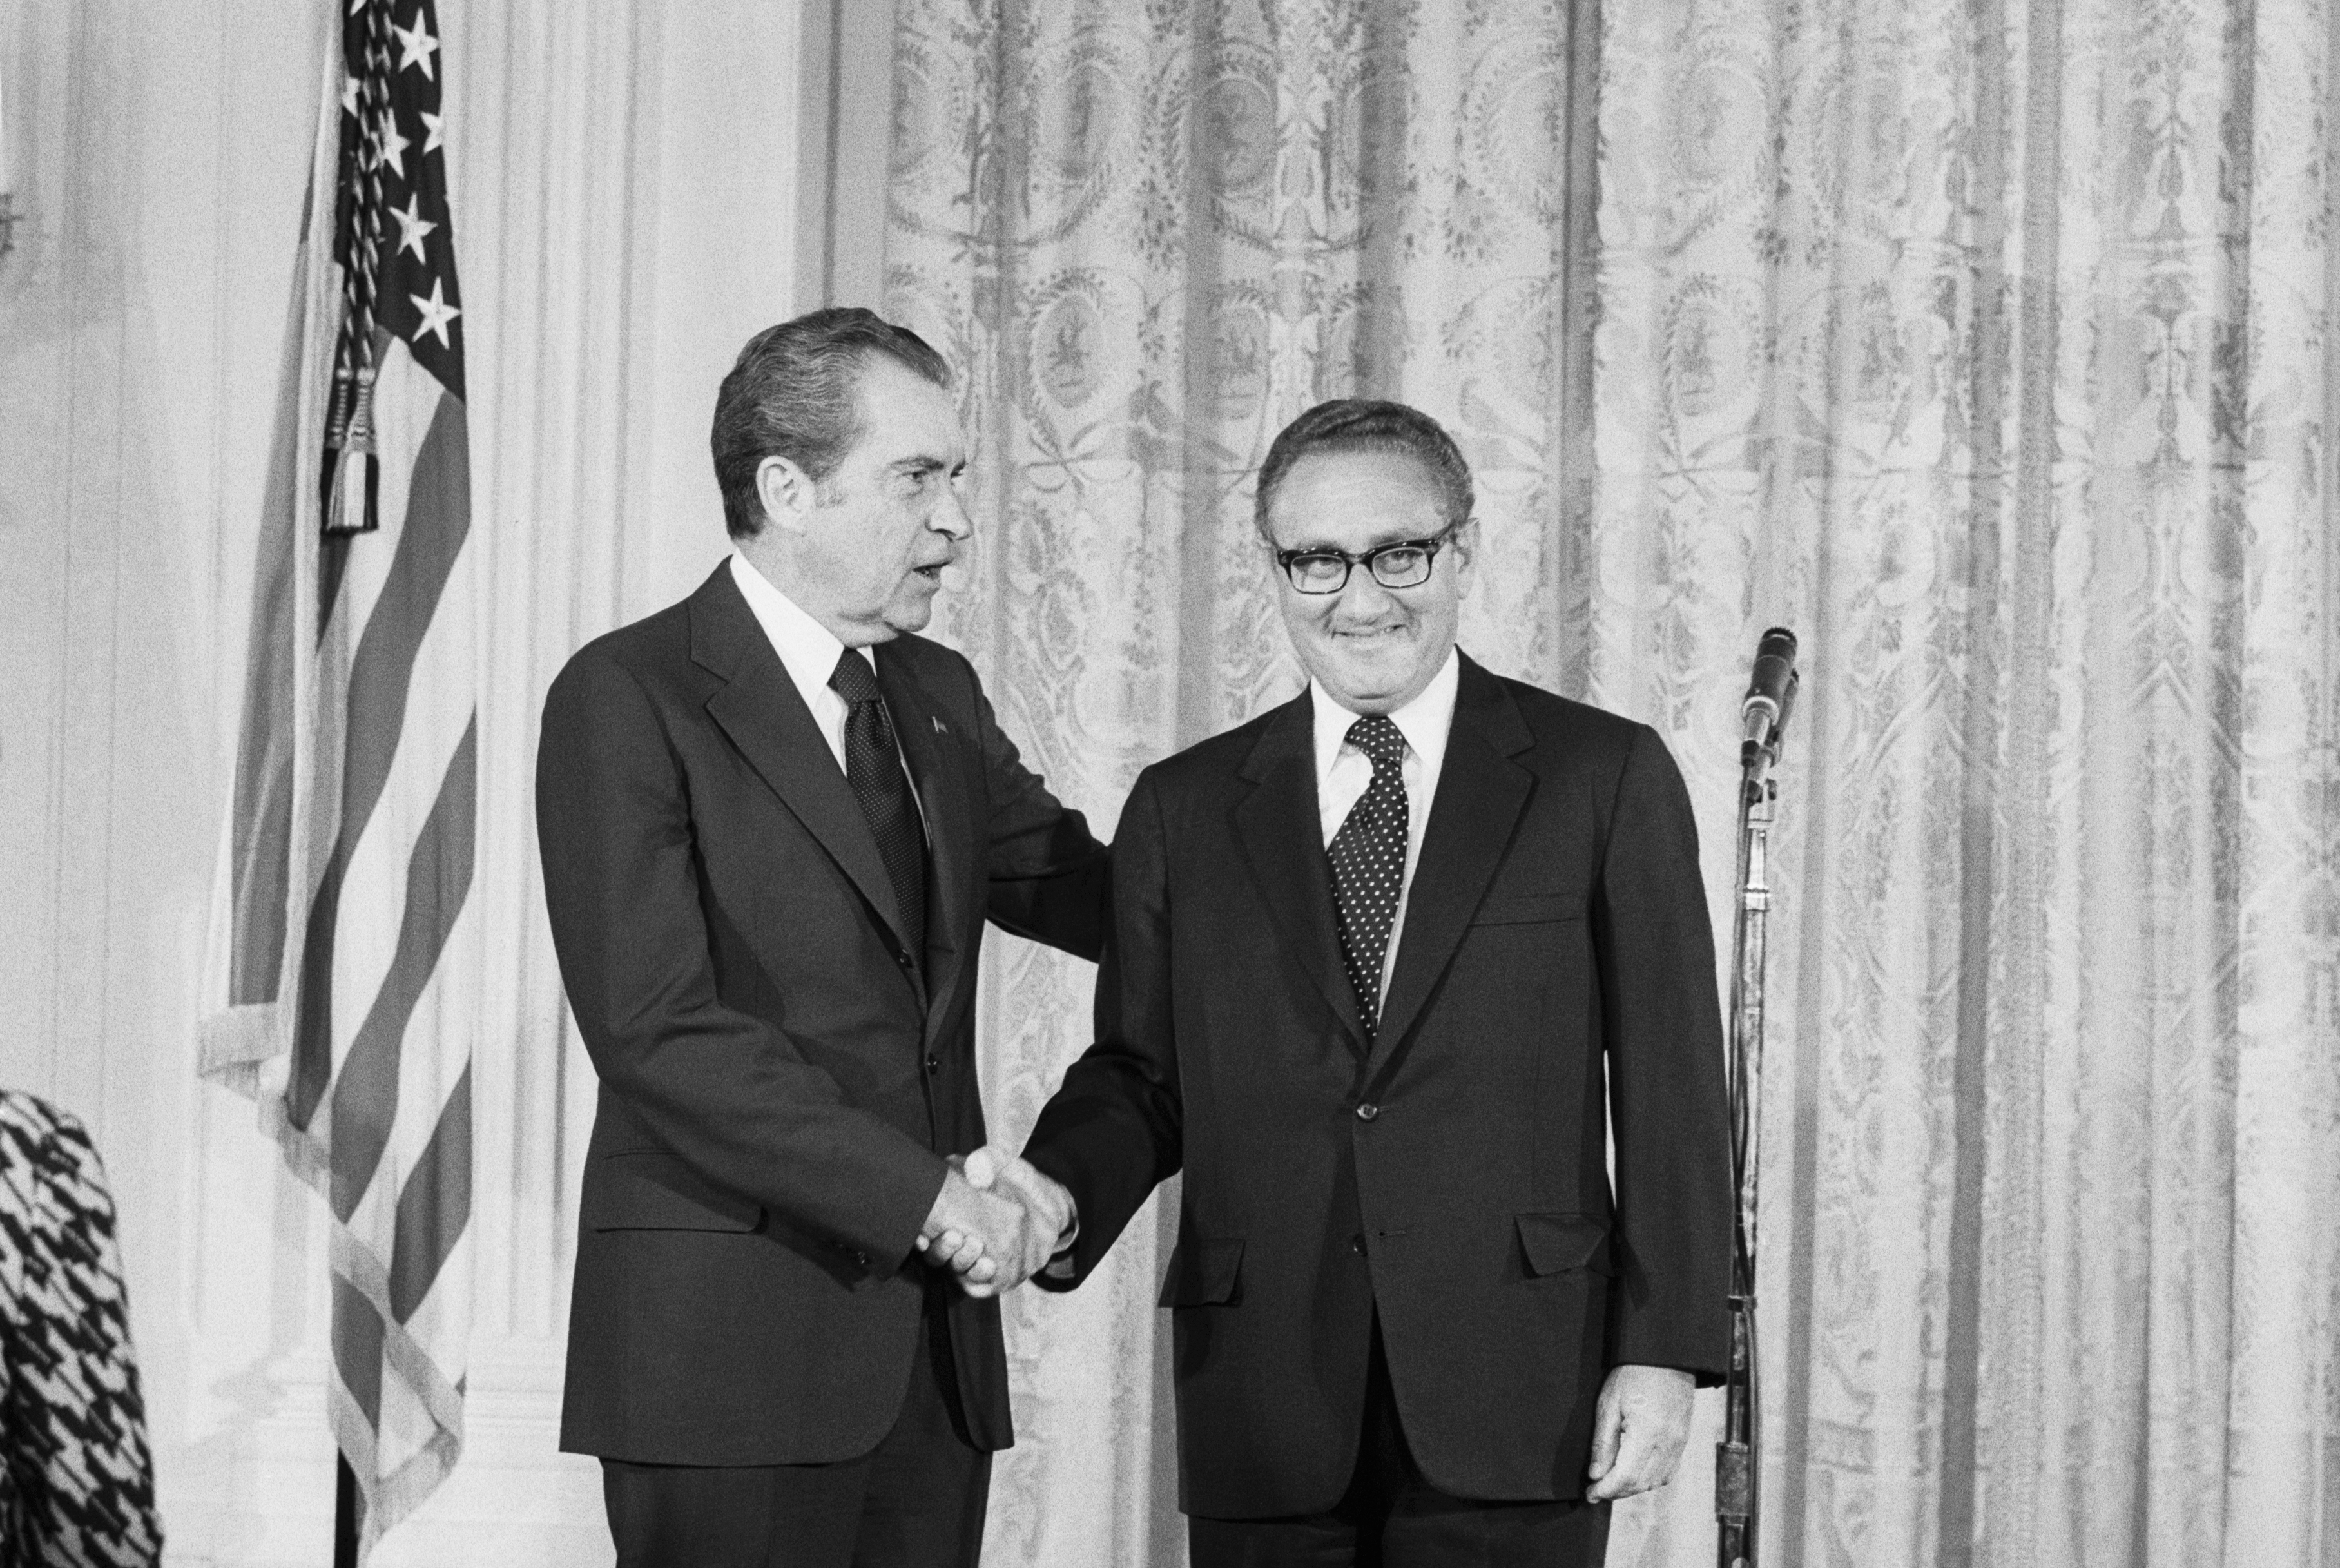 Pres. Nixon congratulates Henry Kissinger after he was sworn in as Secretary of State in a ceremony in the East Room of the White House. (Bettmann—Bettmann Archive)